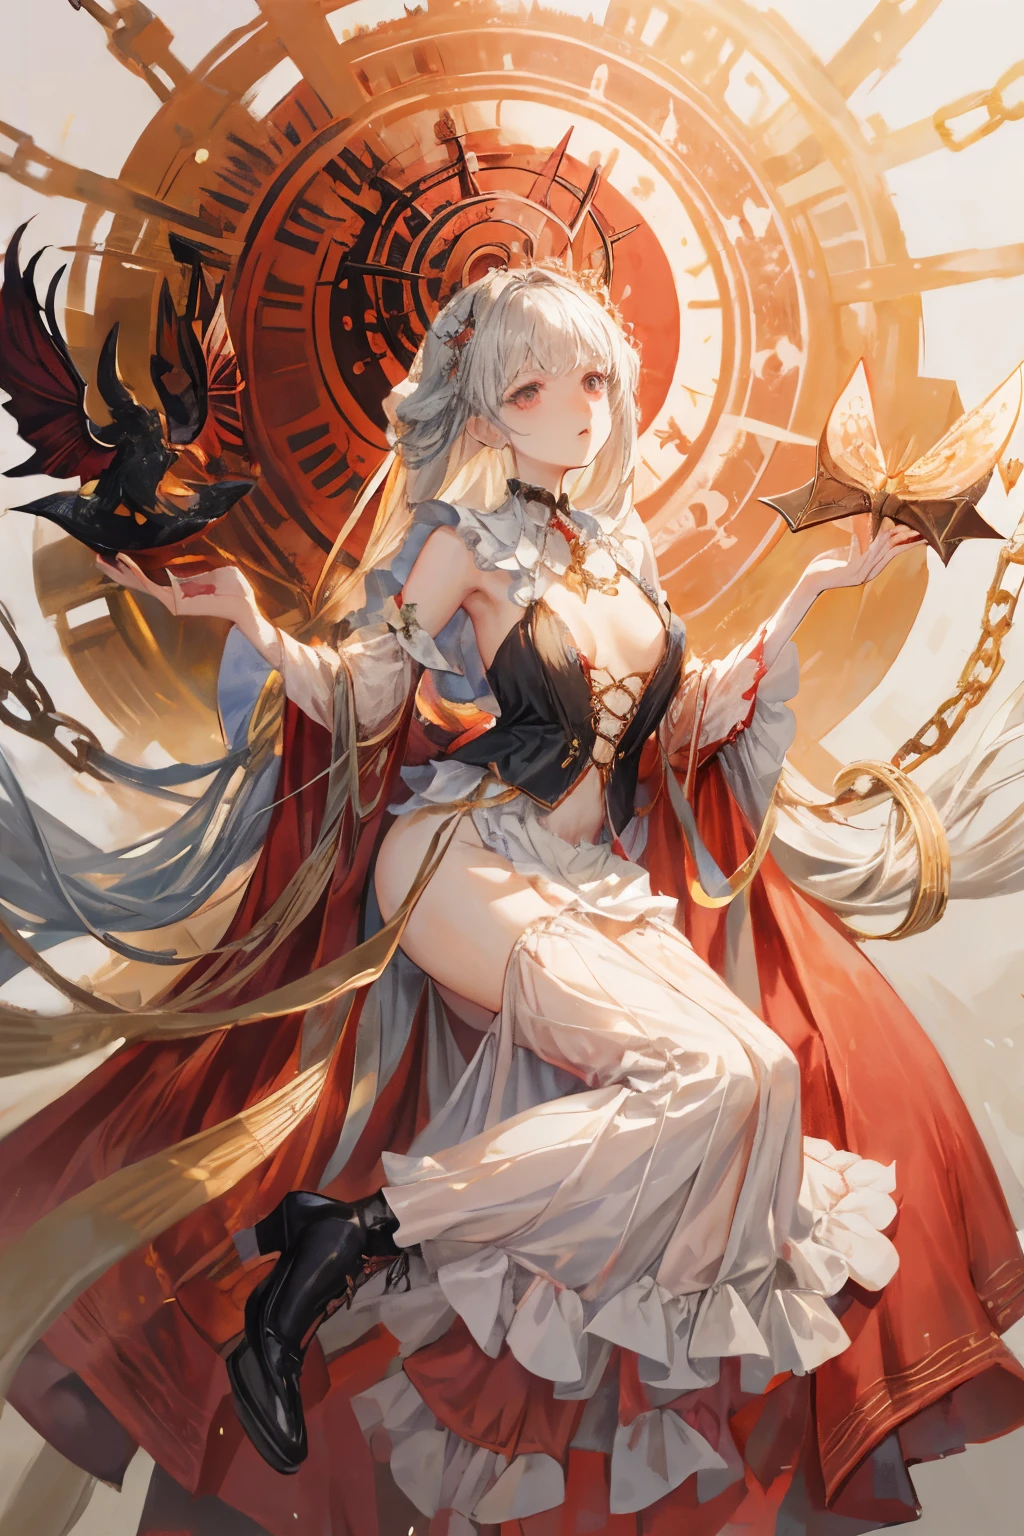  ((best quality)), ((masterpiece)), (detailed), 1girl, Character design, NSFW, scholarly  female, scholar, female scholar, educator, teacher, fortune teller, palm reader, astrology, astrological symbolism, star reading, celestrial theme, heavens, heavens above, constellations, blood magic, blood mage, dynamic poses, long white grey hair, grey white eyes, very skinny, detailed, best quality, no accesoires around the neck, no shoes, prominent collarbones, skinny arms, flat stomach, visible hip bones, full body, blank white background, plain background, white background, red and white clothing, Bloodborne inspired, occult aesthetic, occult, detailed and intricate steampunk and detailed gothic, NSFW, Fluttering lace flared long knee length dress with frilly petticoats, knee length dress, pleated petticoats, petticoats gothic, complex lace boots, gothic aesthetic, wielding a mighty sword with mechanical components, mandalas, small breasts, a fairy, various different types of insect wings, beetle wings, NSFW, full body, whole body, body, chains, 